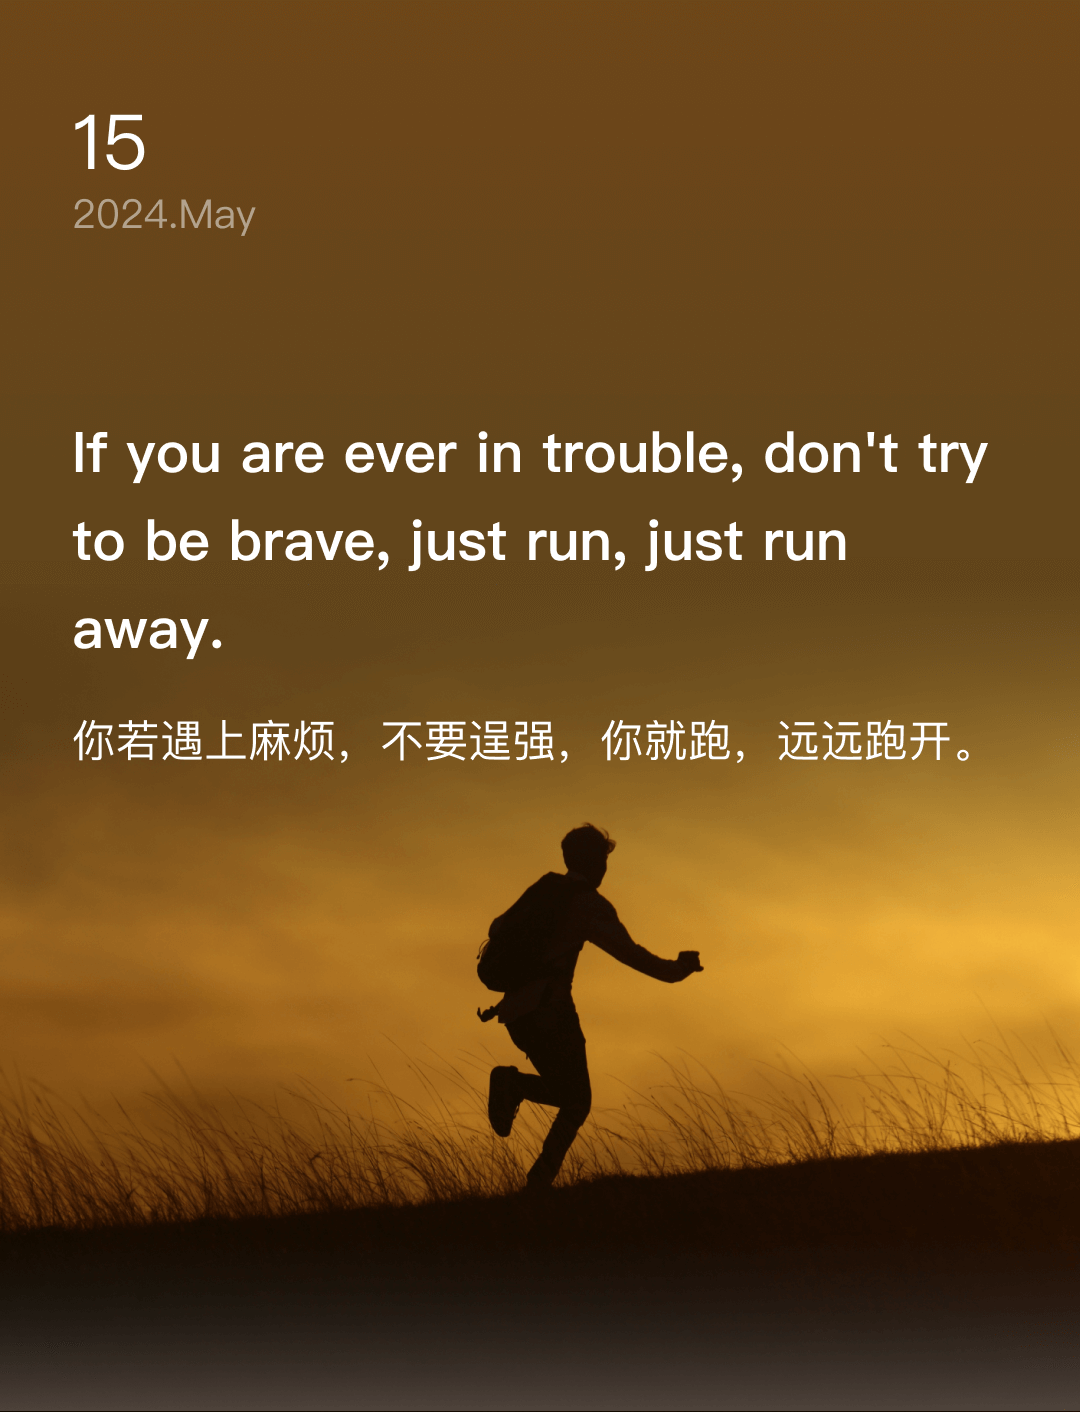 If you are ever in trouble, don't try to be brave, just run, just run away.